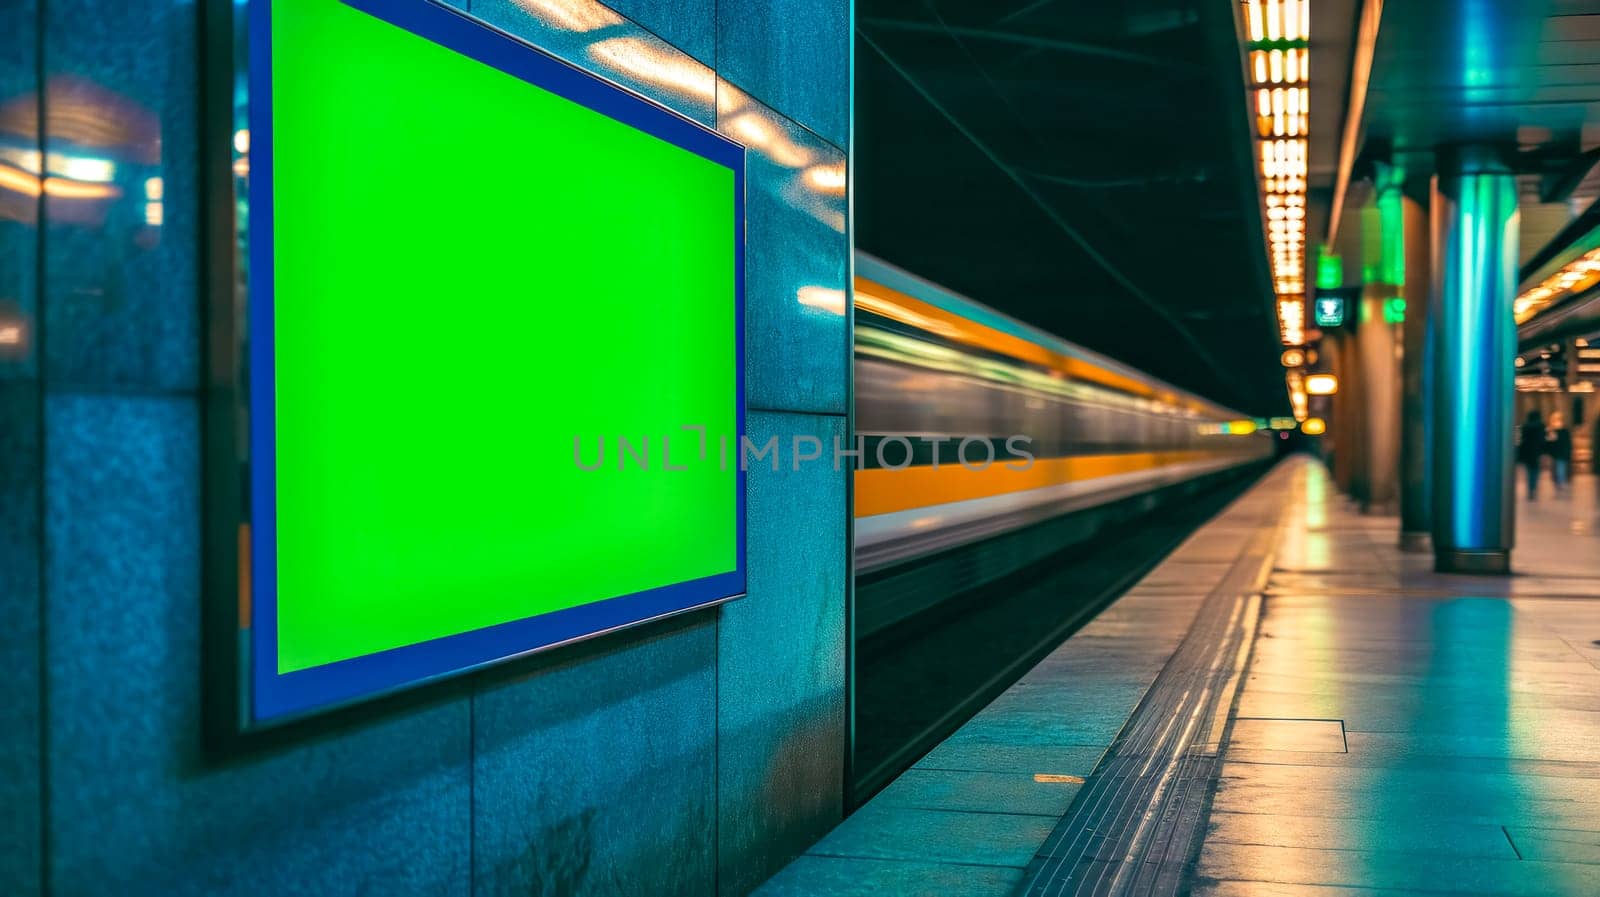 modern metro station with a motion-blurred train passing by, featuring a vivid green screen on a billboard, ready for advertising, against a backdrop of warm lights and cool-toned infrastructure.